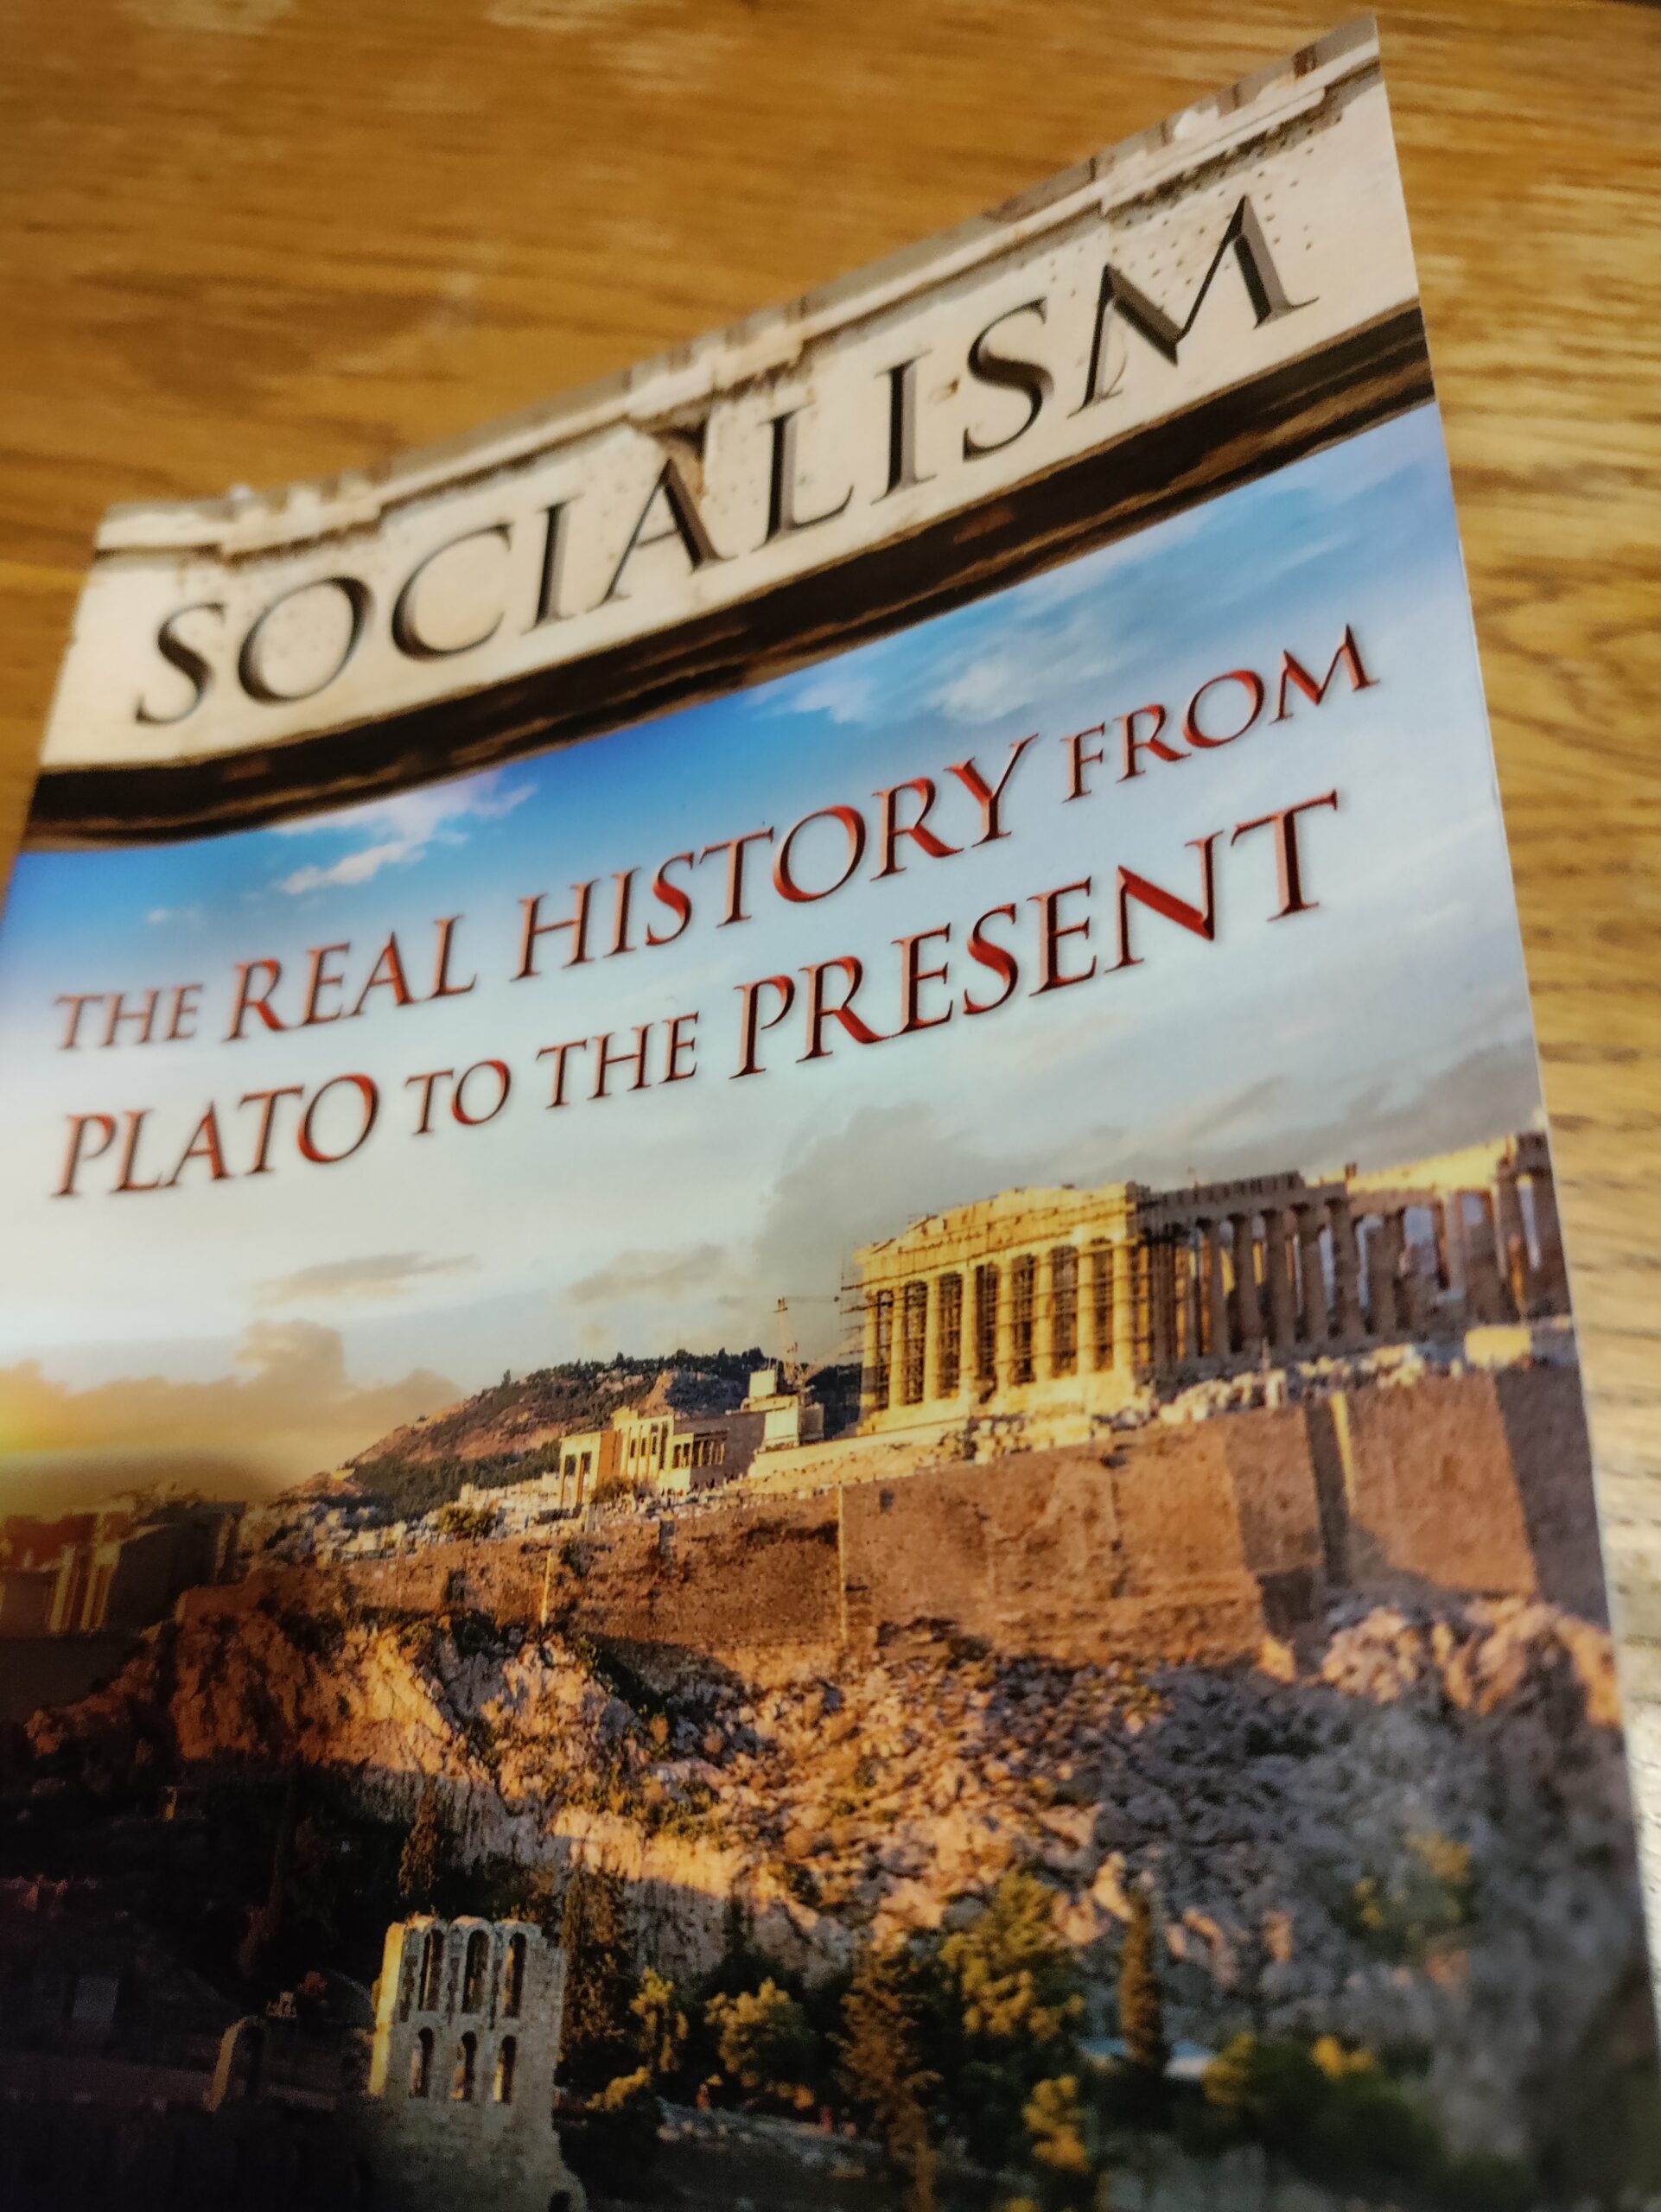 Podcast – Socialism, The Real History: From Plato to the Present; Guest: Bill Federer